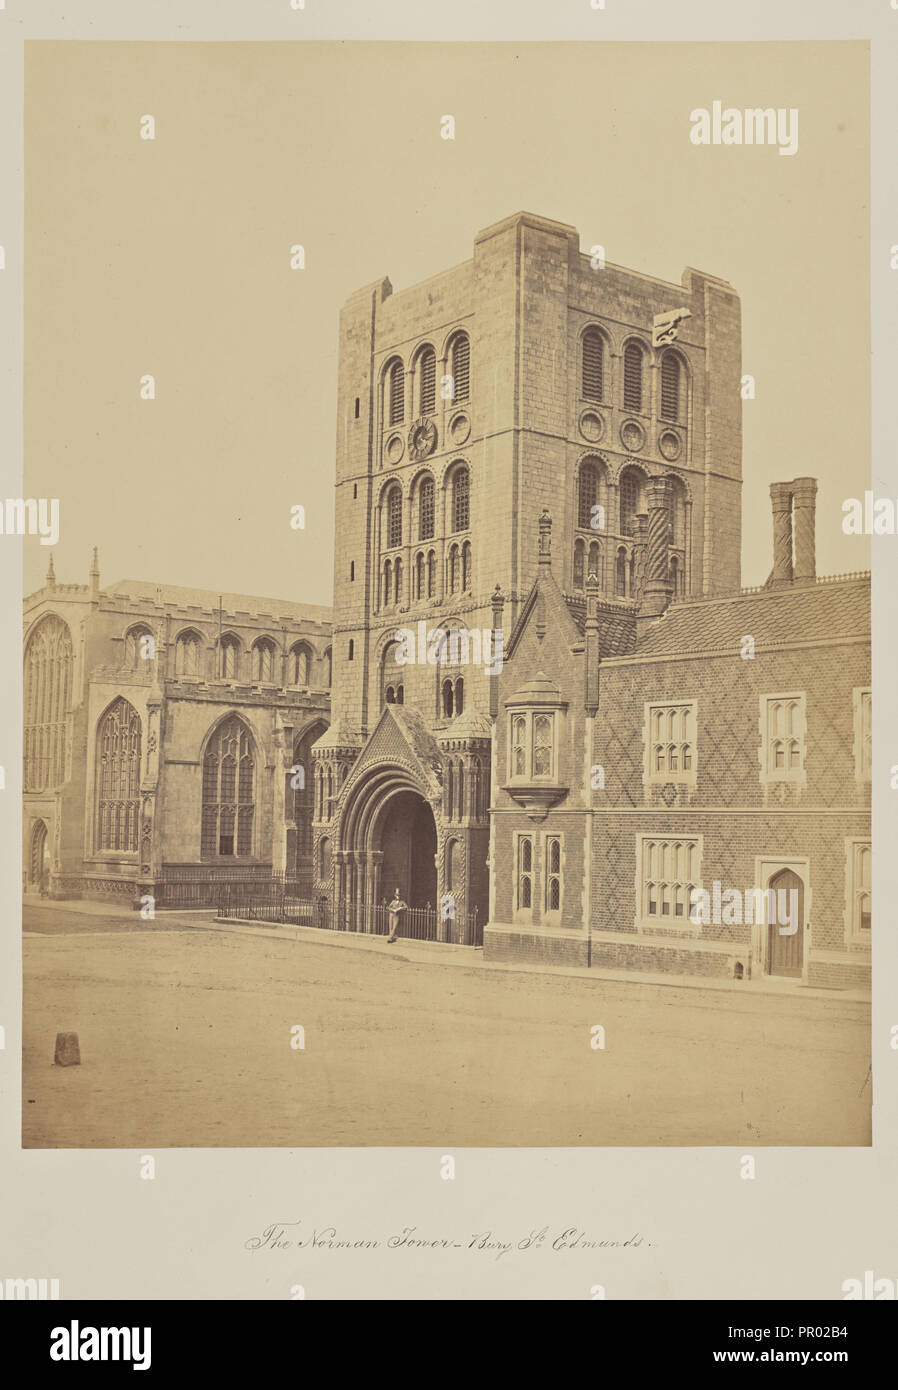 The Norman Tower - Bury St Edmunds; Attributed to John Dixon Piper, Scottish, active 1850s - 1860s, Bury St. Edmunds, Great Stock Photo